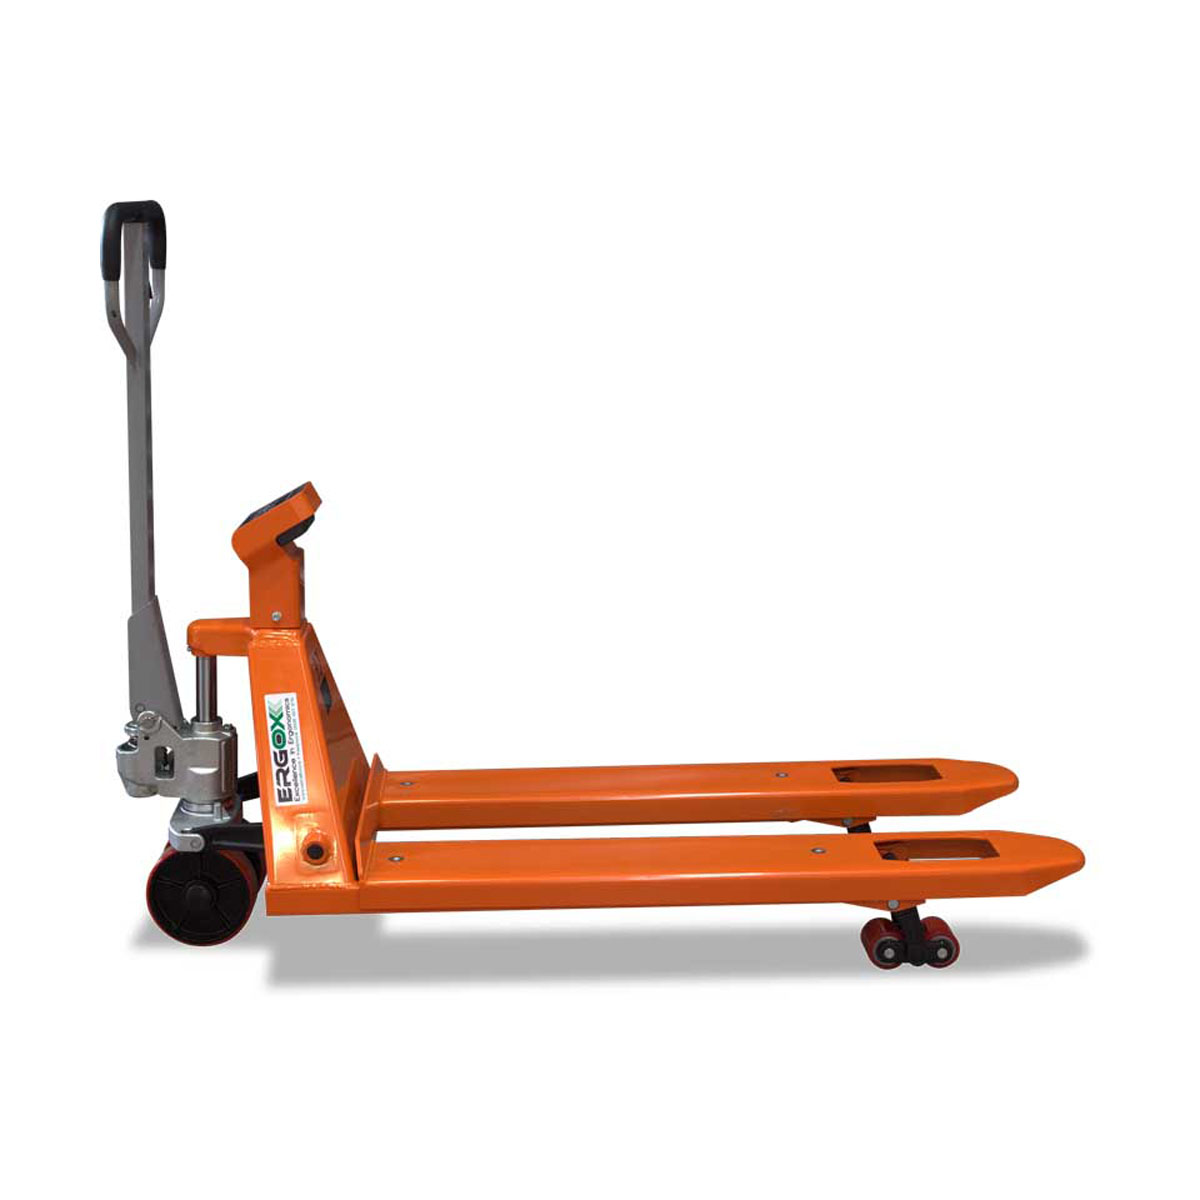 Buy Pallet Truck with Scales in 2-Way Pallet Trucks from Astrolift NZ